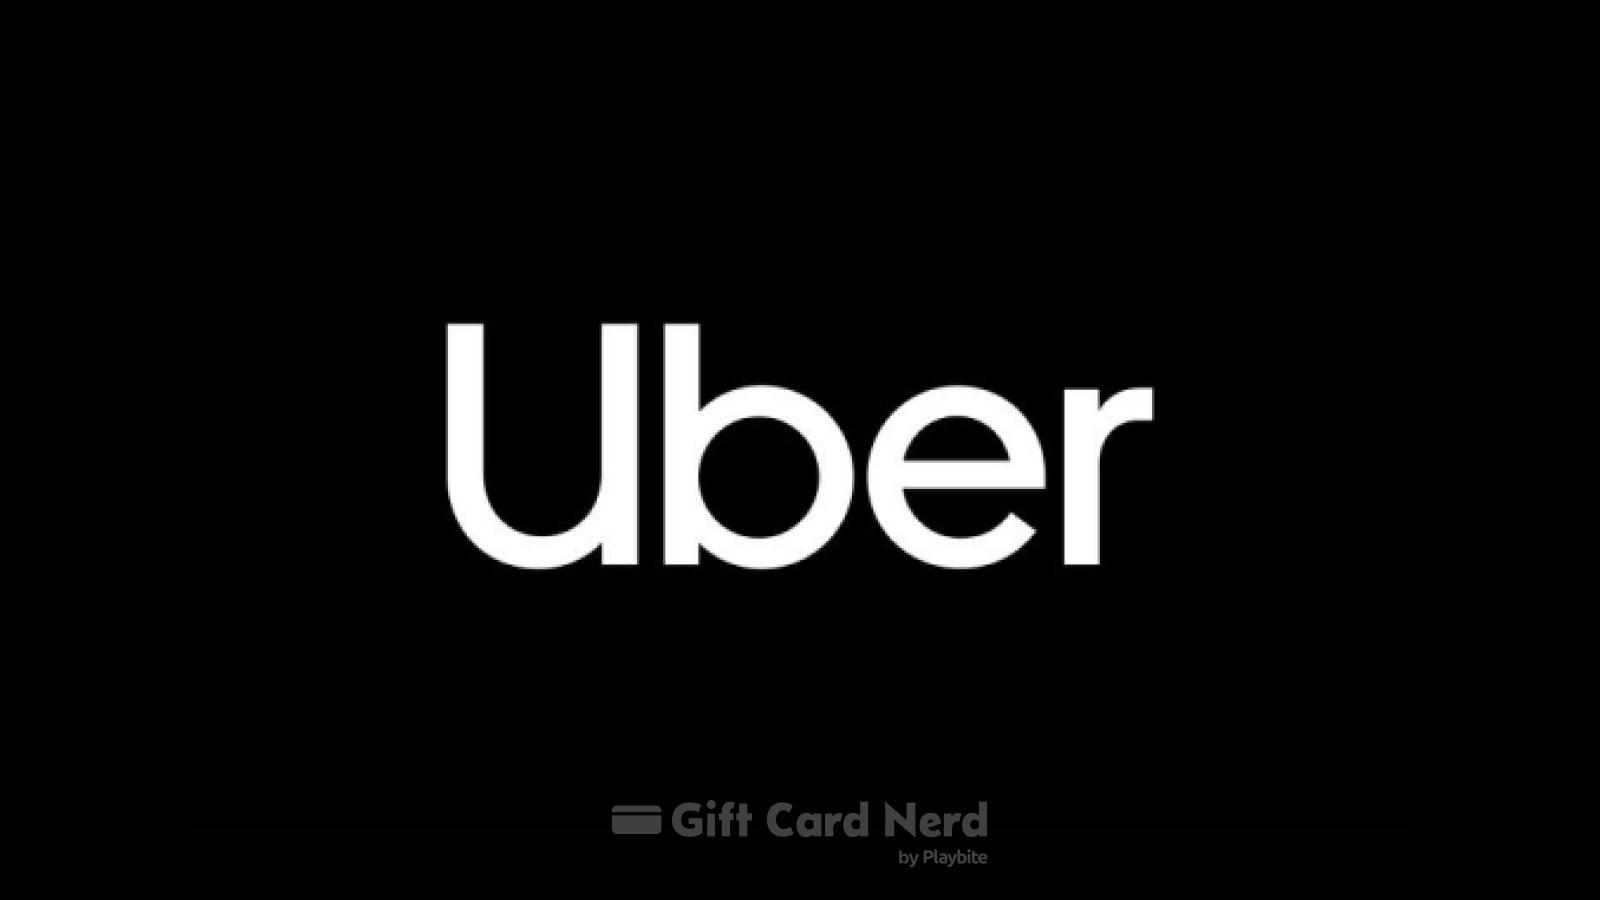 Can I Use an Uber Gift Card on Venmo?